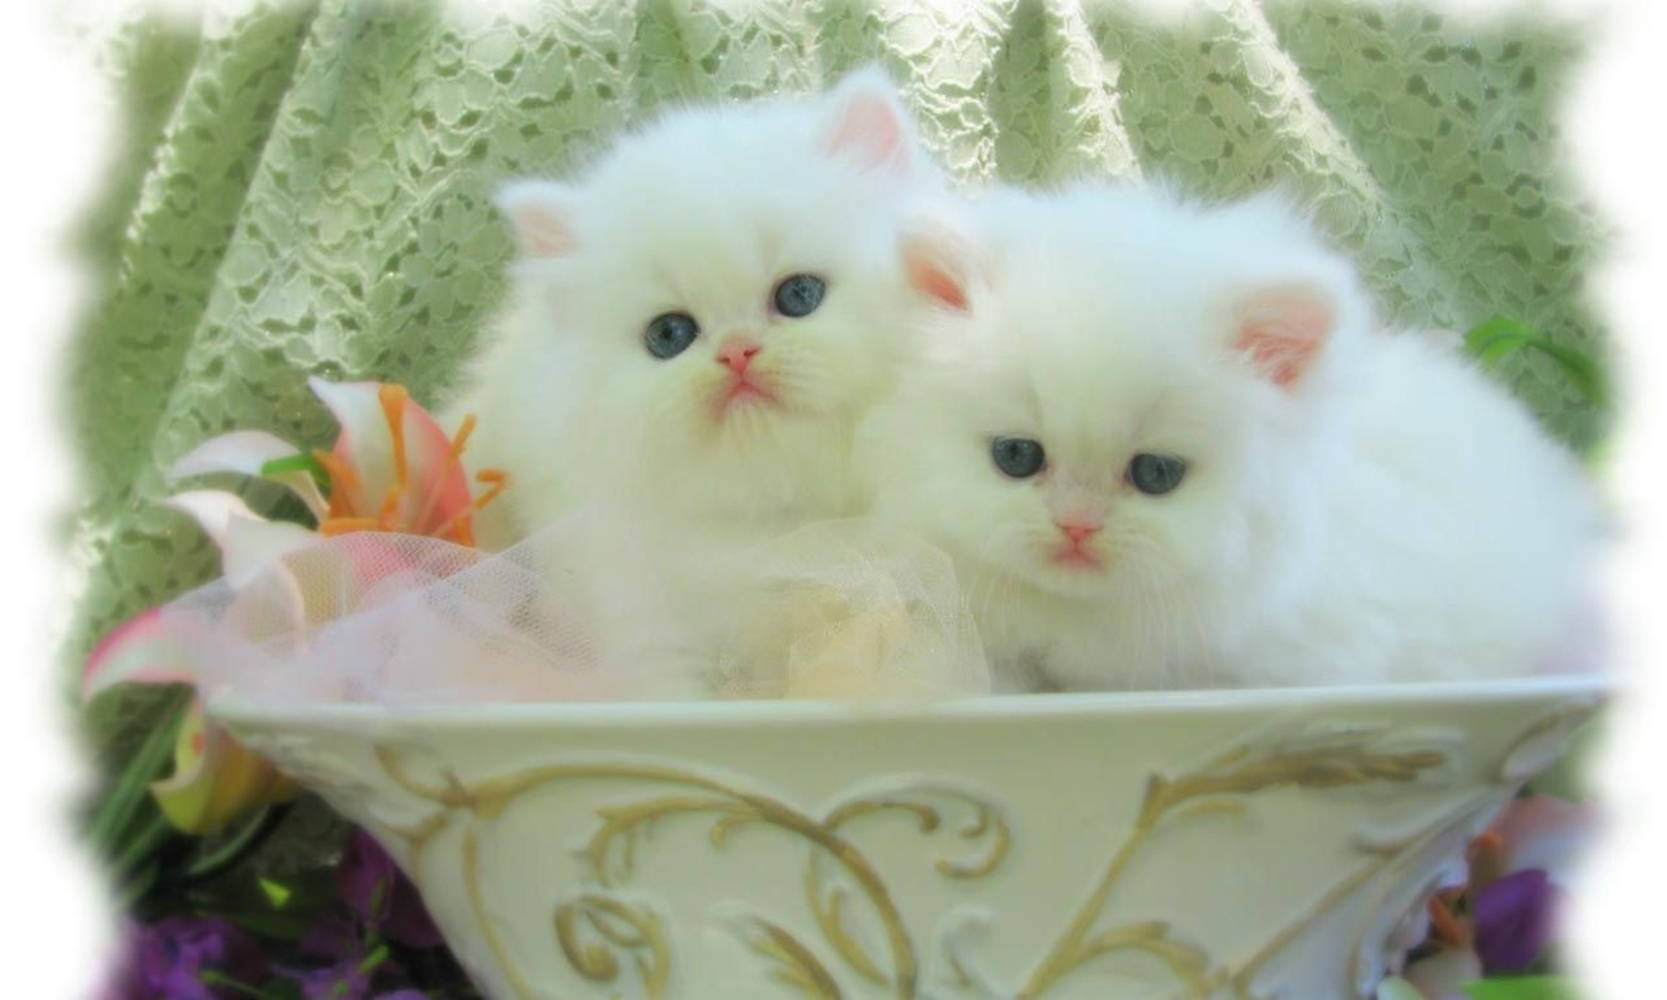 "Ethereal White Cats Nestled in a Vase" Wallpaper